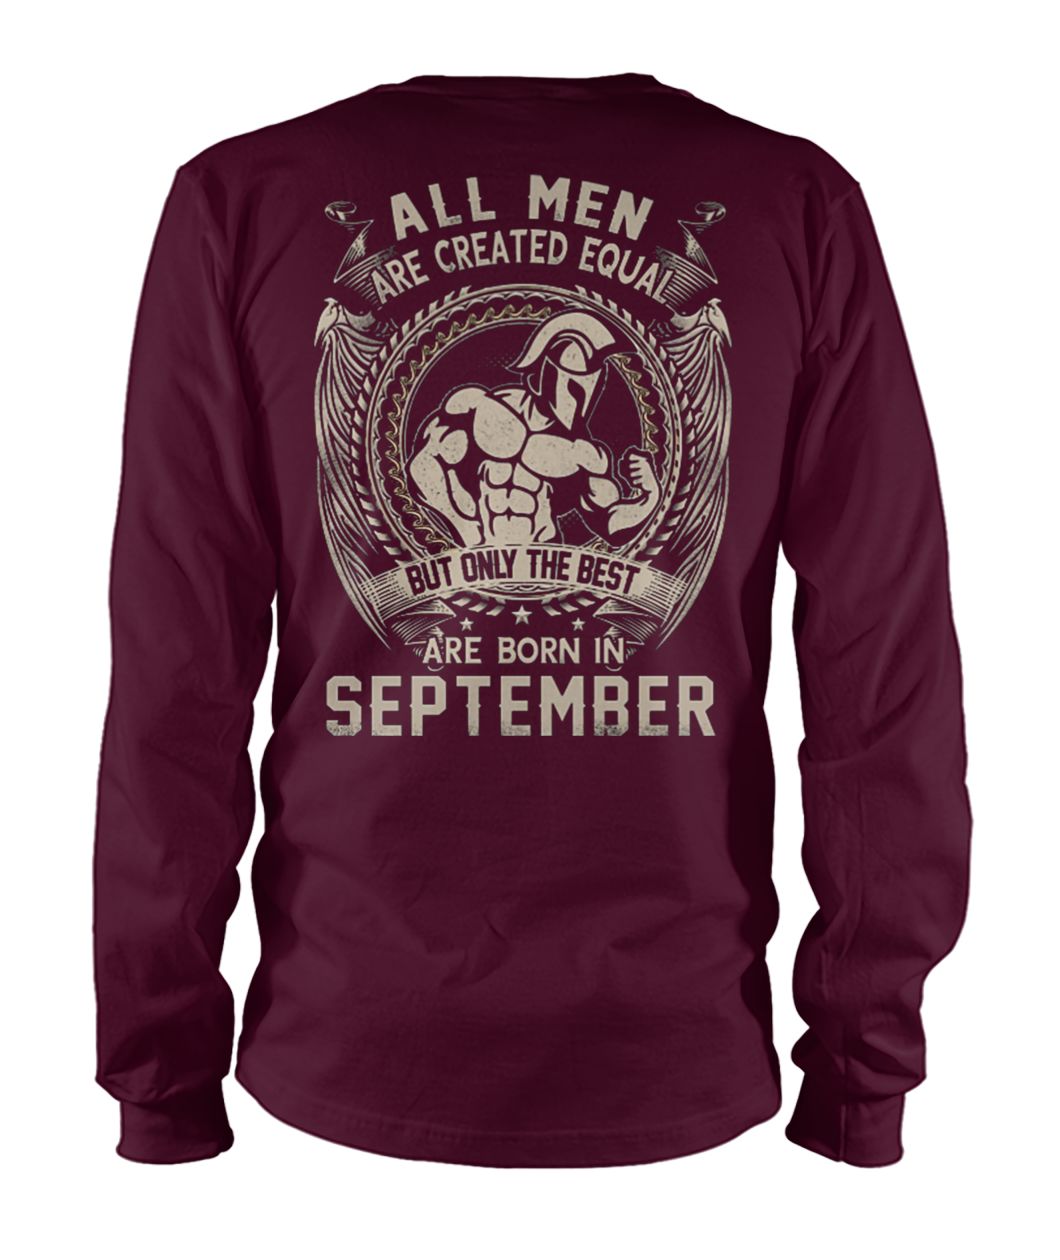 All men created equal but the best are born in september unisex long sleeve